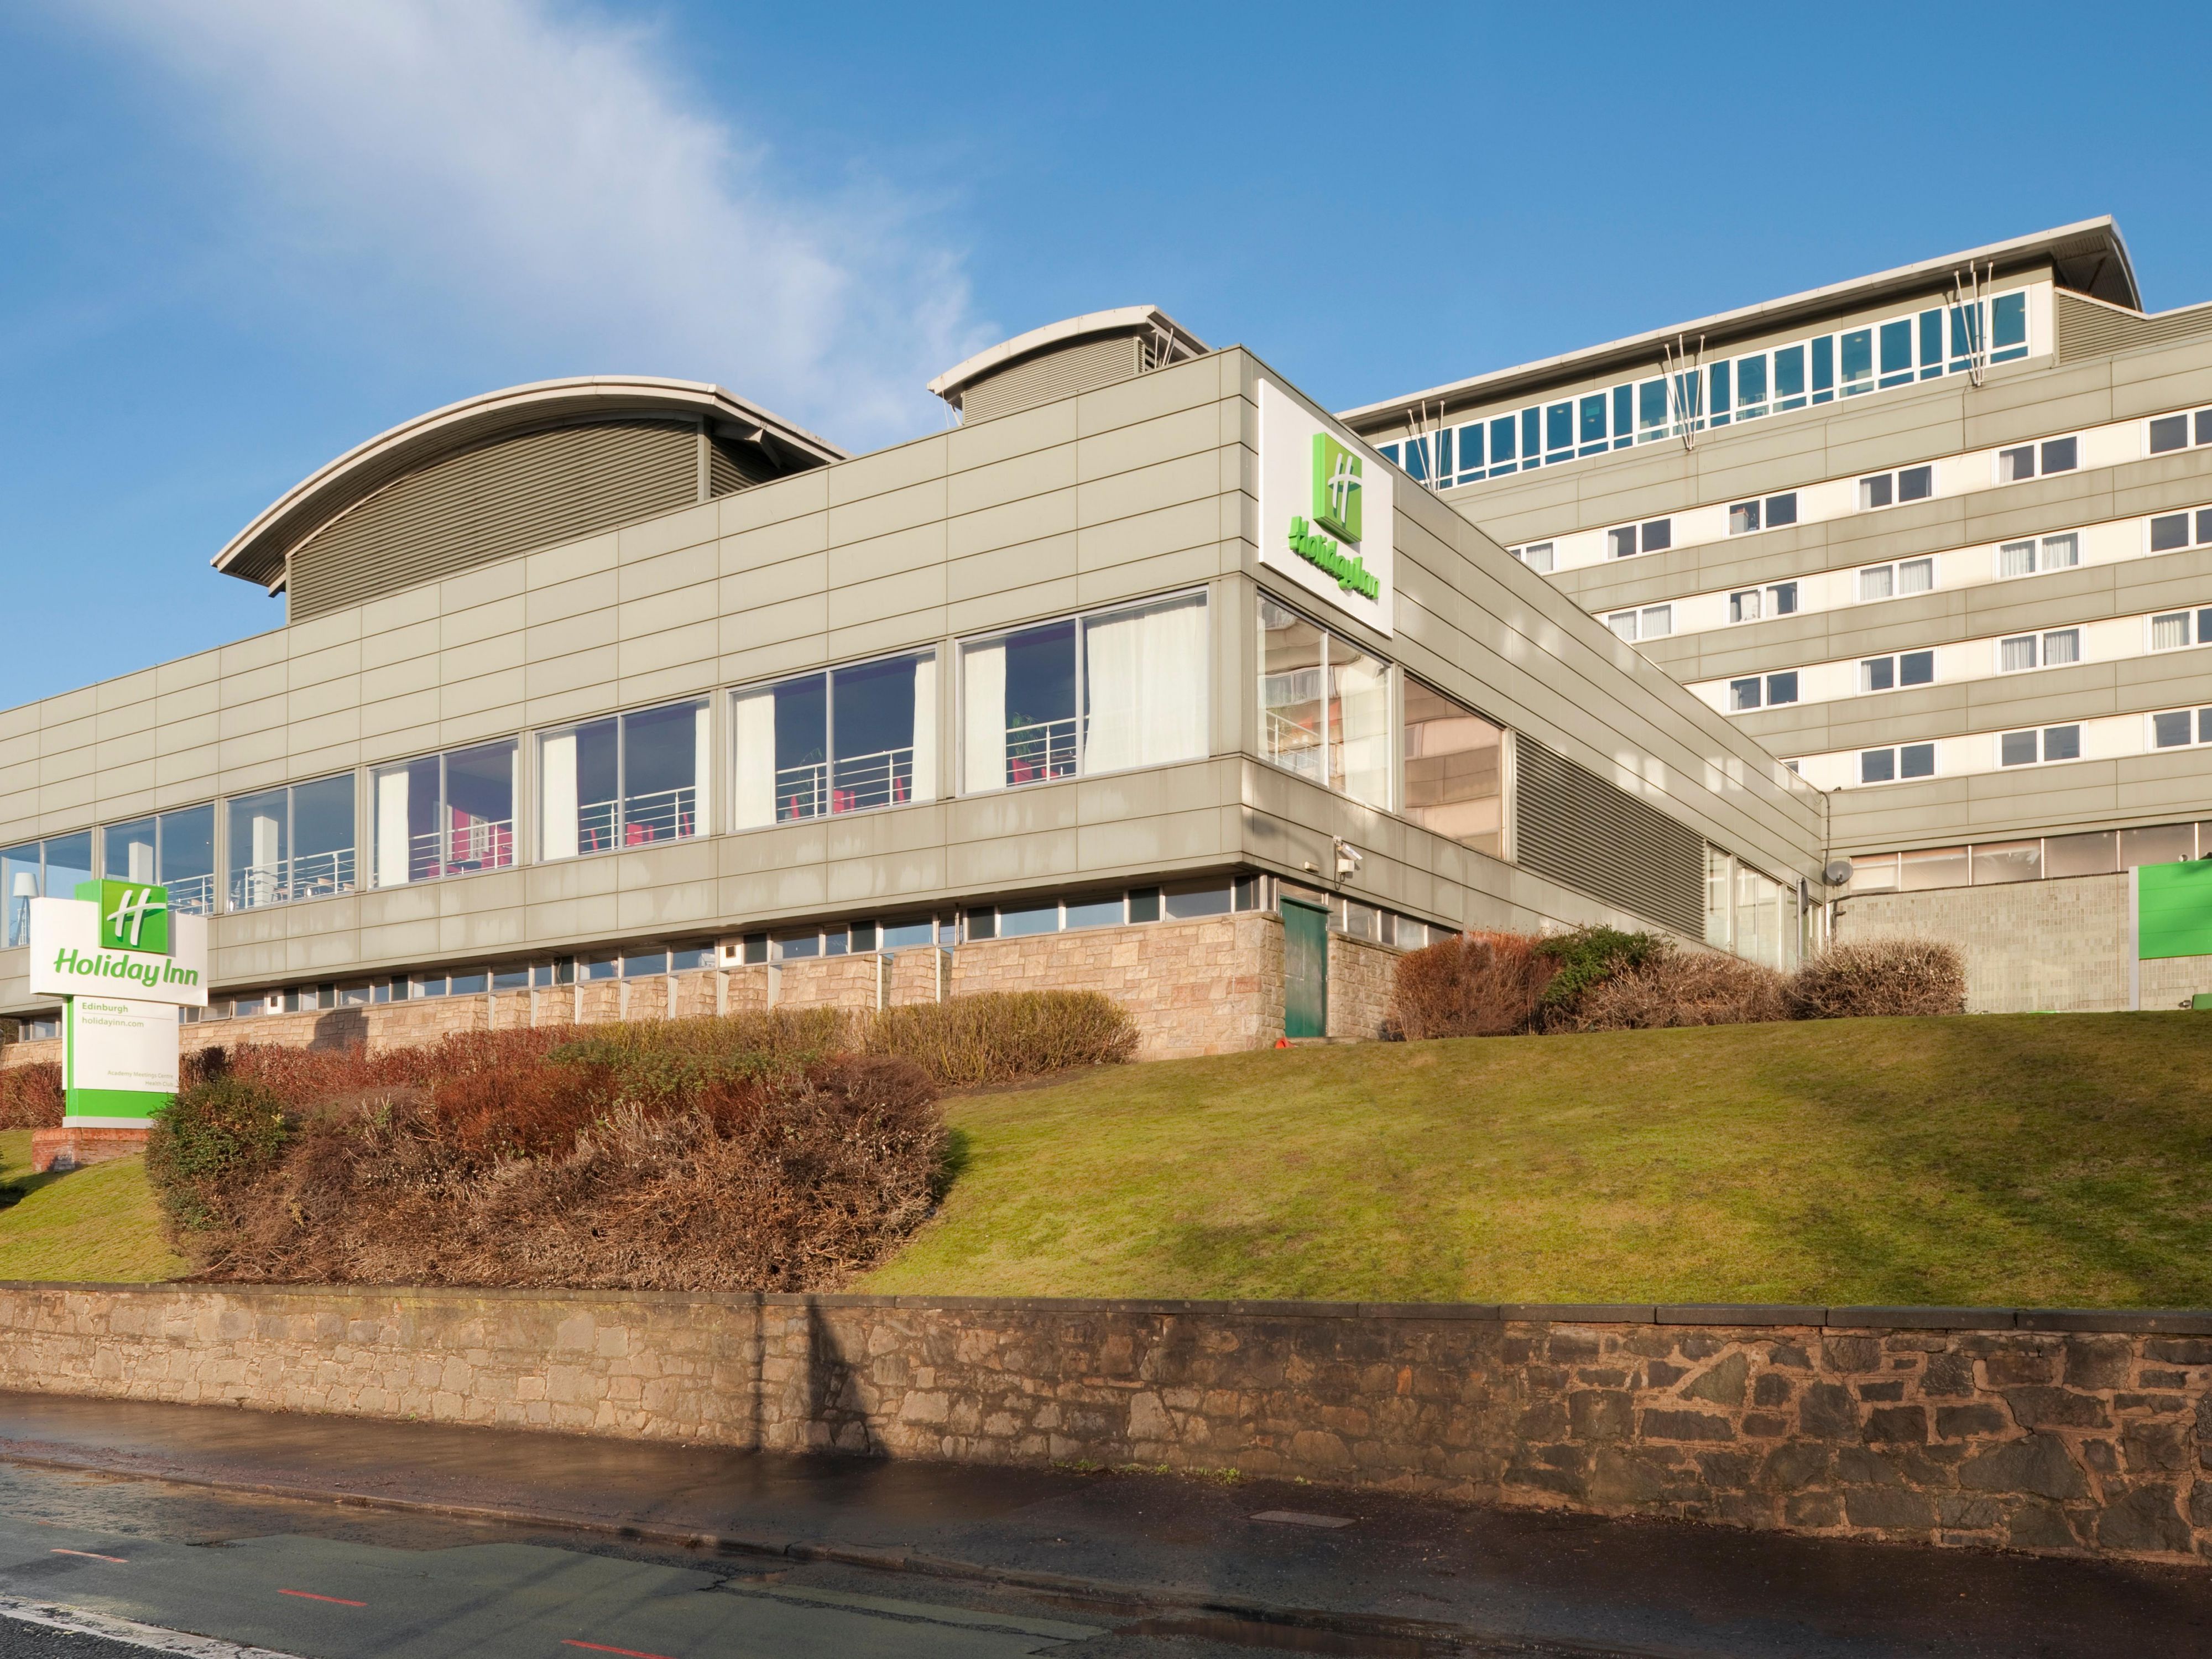 Just click on the link for a chance to visit Holiday Inn Edinburgh virtually with a fully interactive, virtual tour.  Move through the hotel exploring the bar, restaurant, meeting and event spaces, bedrooms and Spirit Health Club